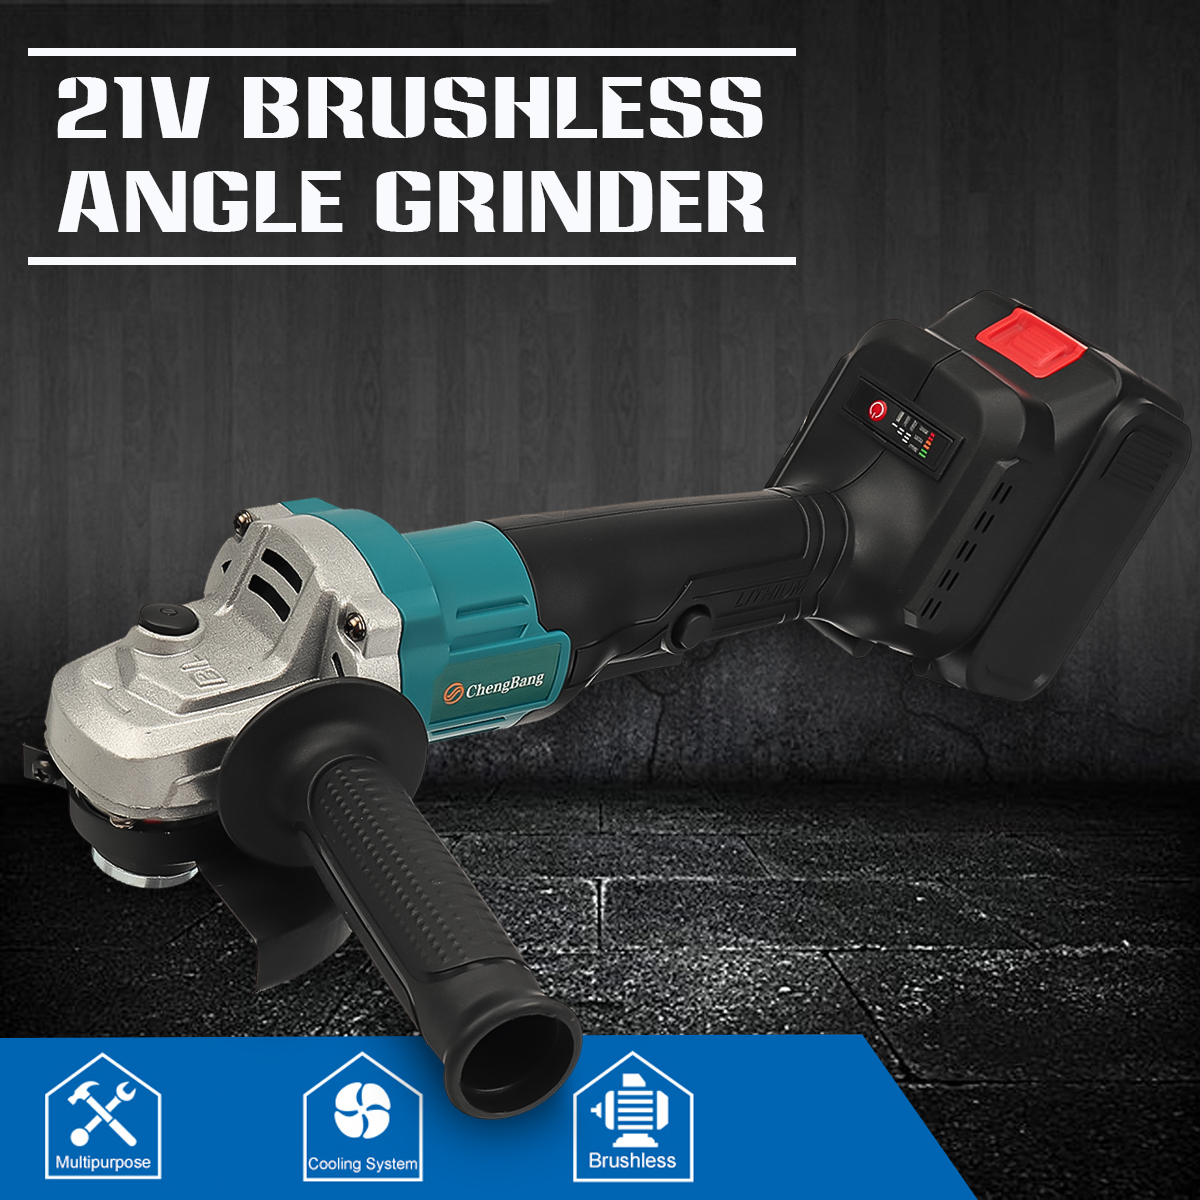 100mm-1580W-Electric-Cordless-Brushless-Angle-Grinder-Grinding-Cutting-Machine-Tool-Fit-Makita-EU-Pl-1891857-5